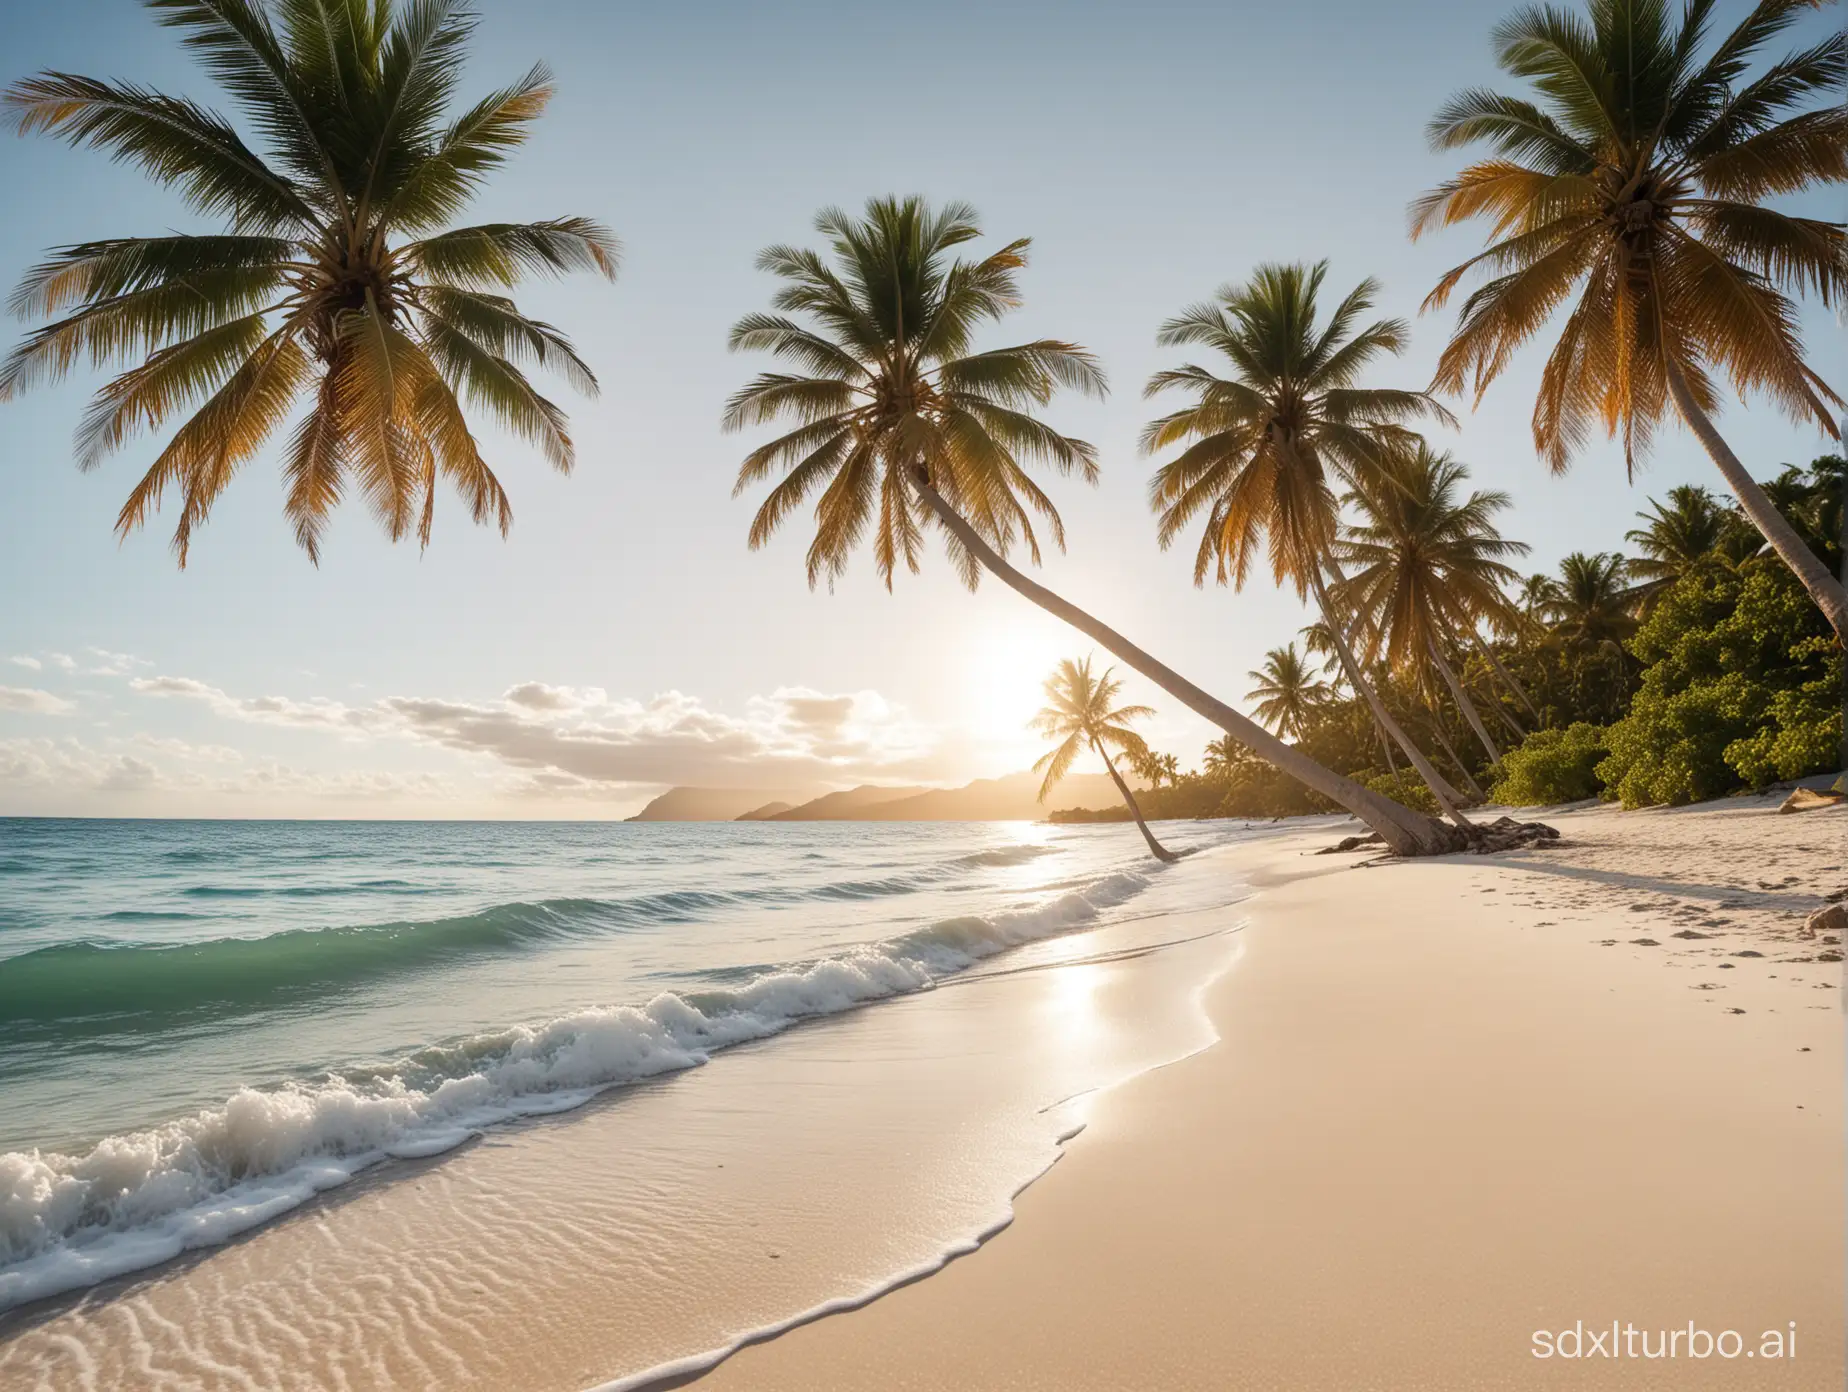 Sunny-Day-Seashore-View-Wallpaper-of-Palm-Trees-and-White-Sand-in-Venezuela